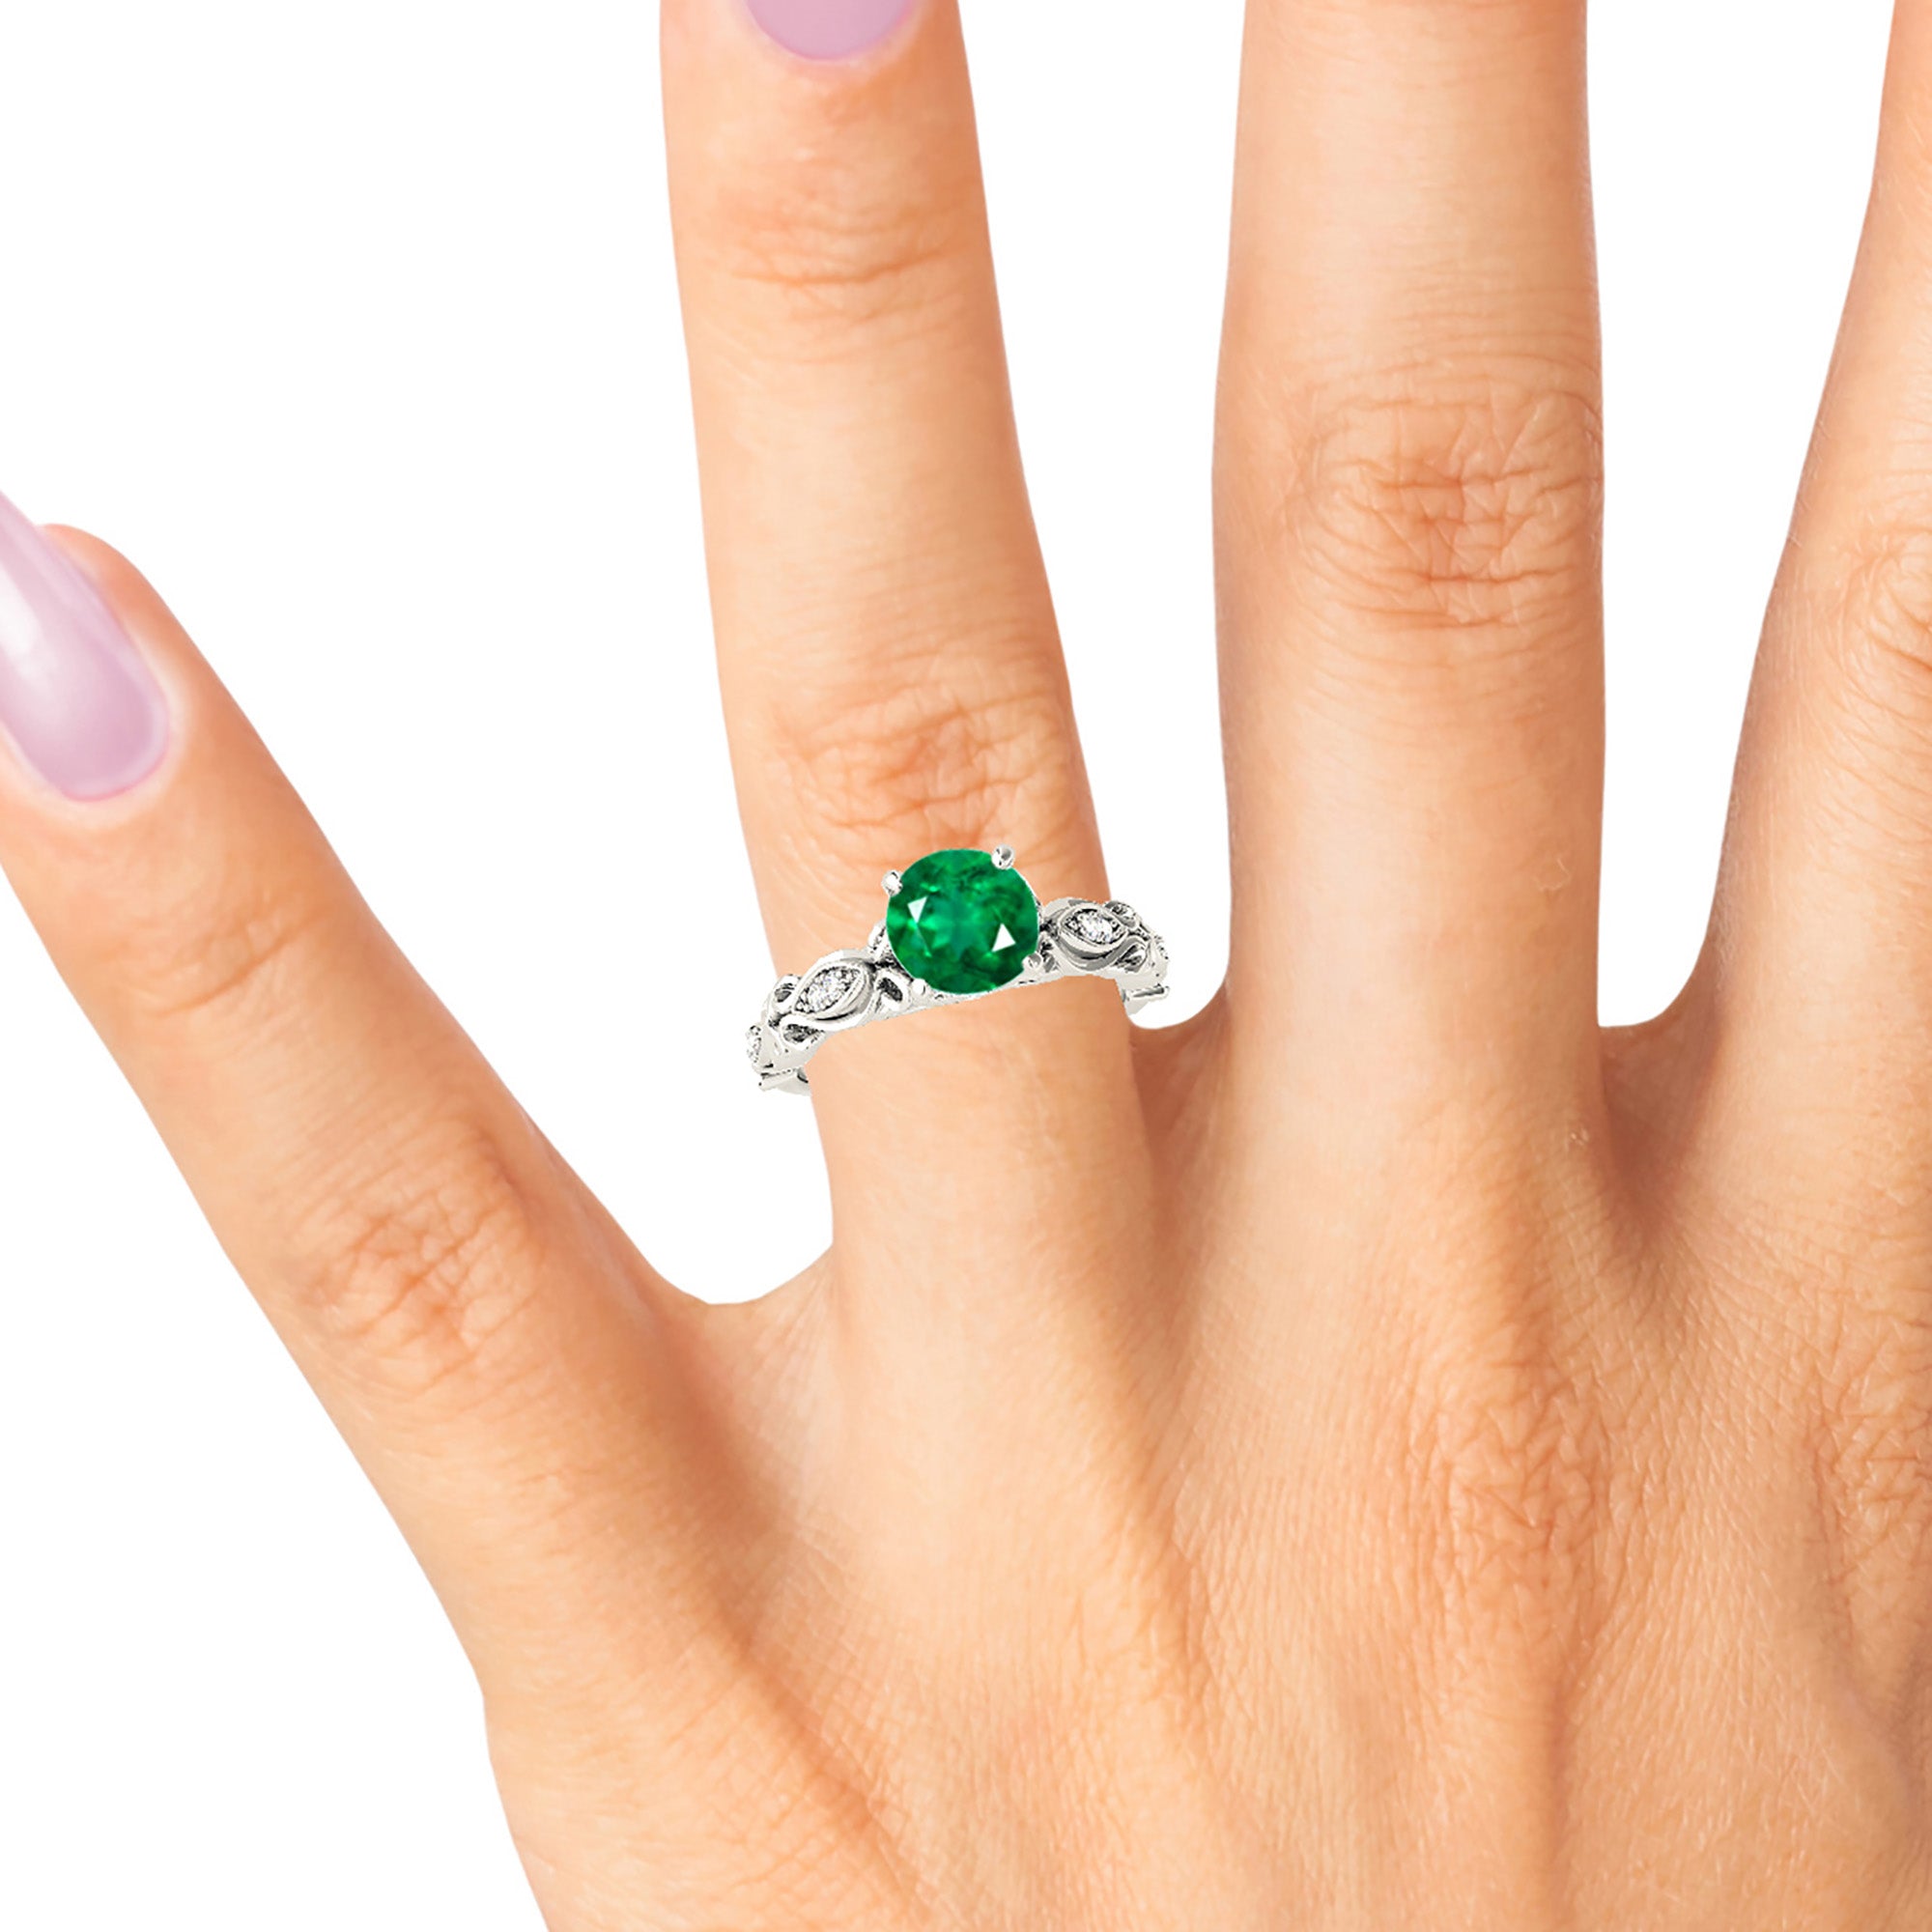 1.75 ct. Genuine Emerald Solitaire Ring With 0.20 ctw. Side Accent Diamonds,Filigree band-in 14K/18K White, Yellow, Rose Gold and Platinum - Christmas Jewelry Gift -VIRABYANI